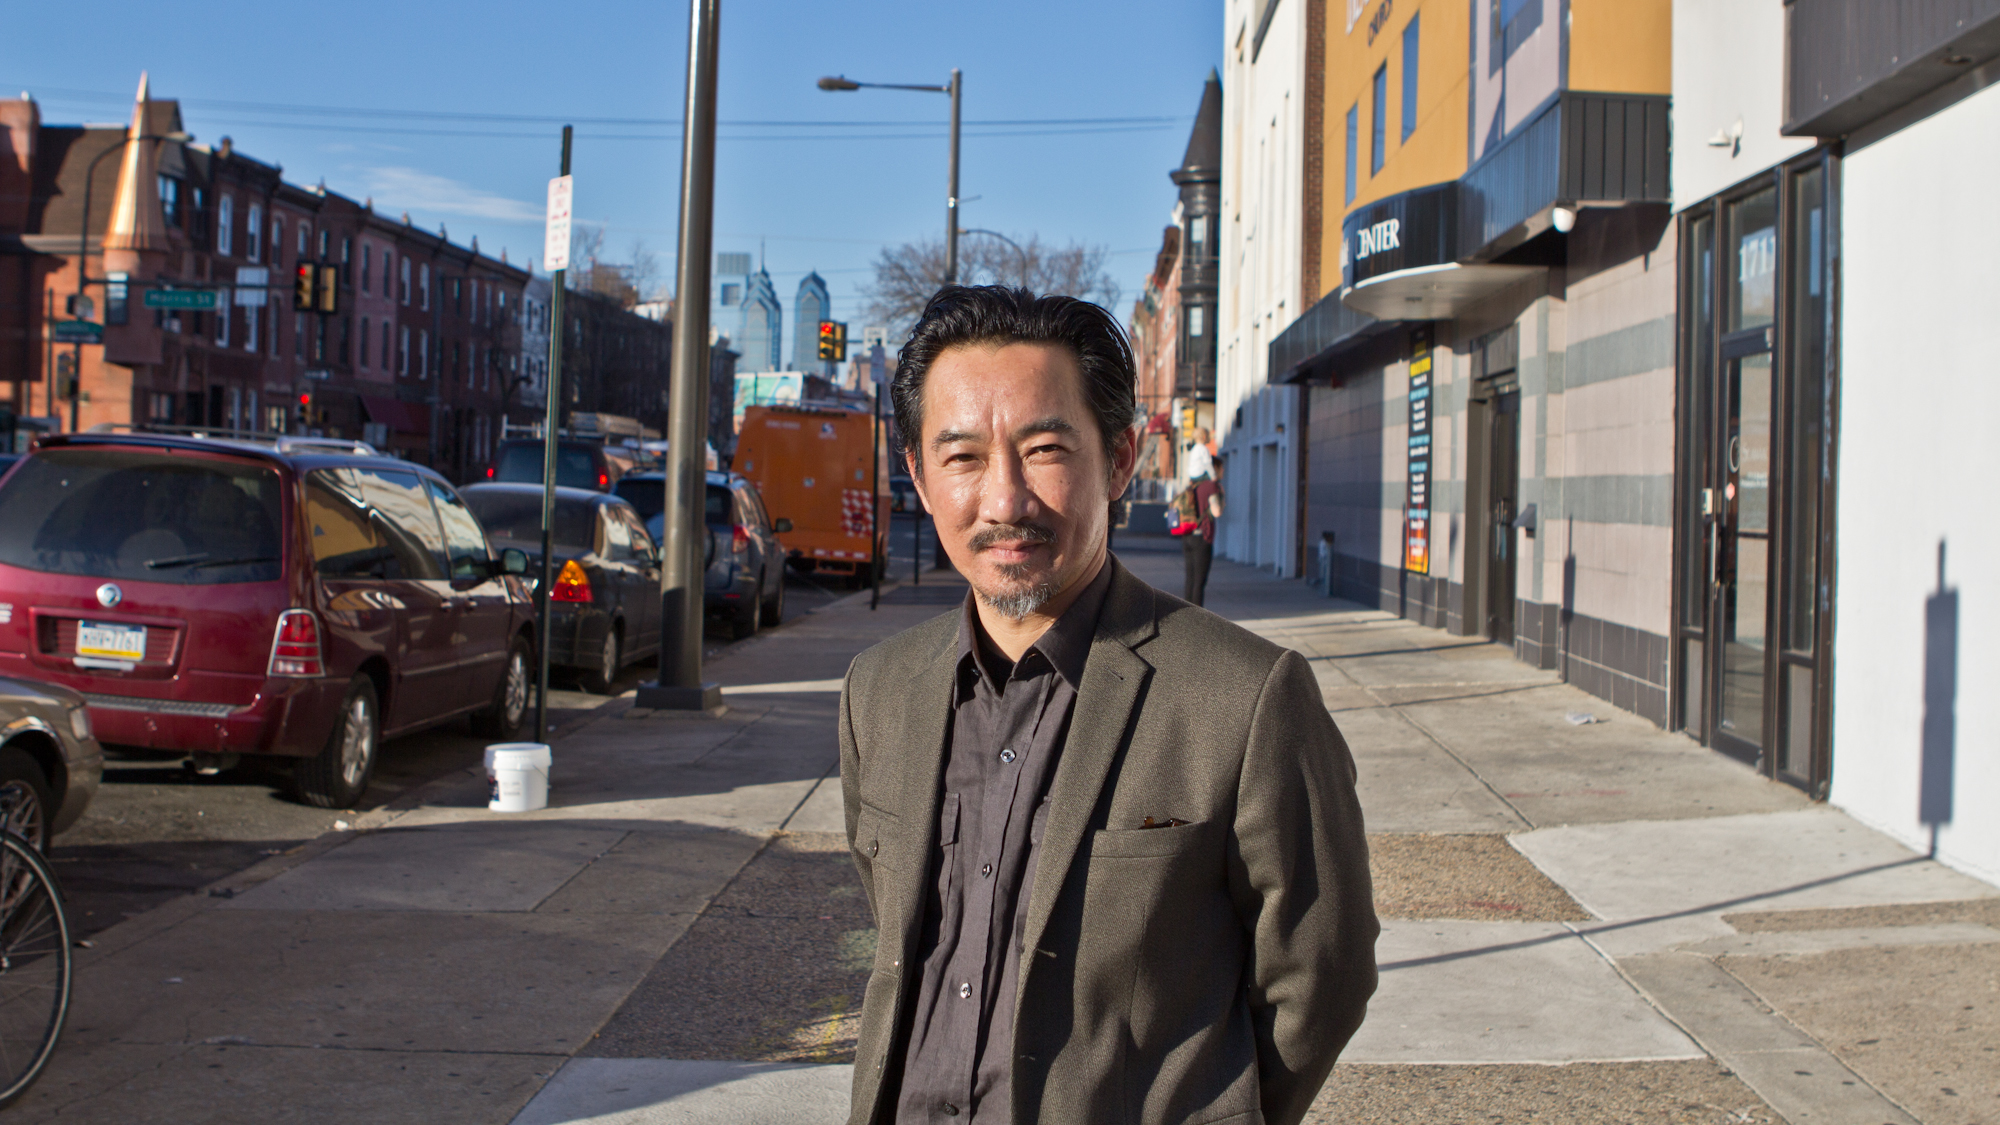 Thoai Nguyen is Chief Executive Officer of Southeast Asian Mutual Assistance Association Coalition. He came with his family to Philadelphia when he was 9 years-old. (Kimberly Paynter/WHYY)